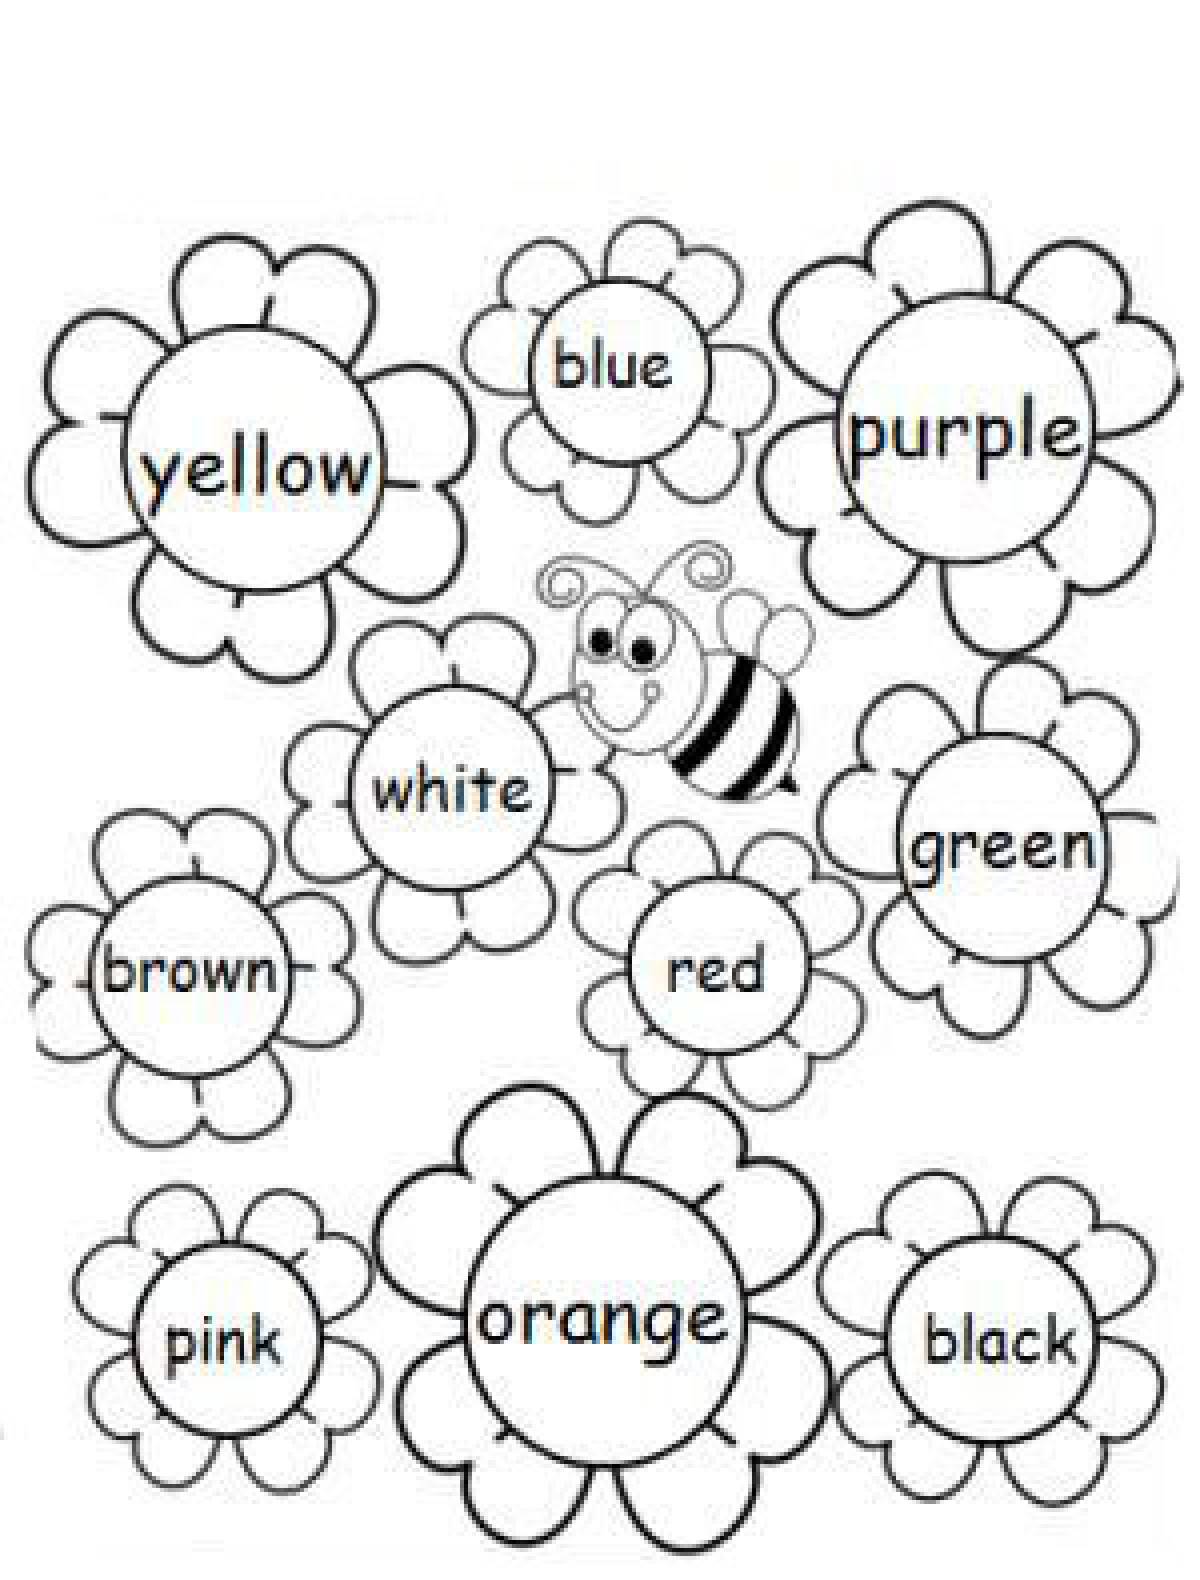 Colors in english